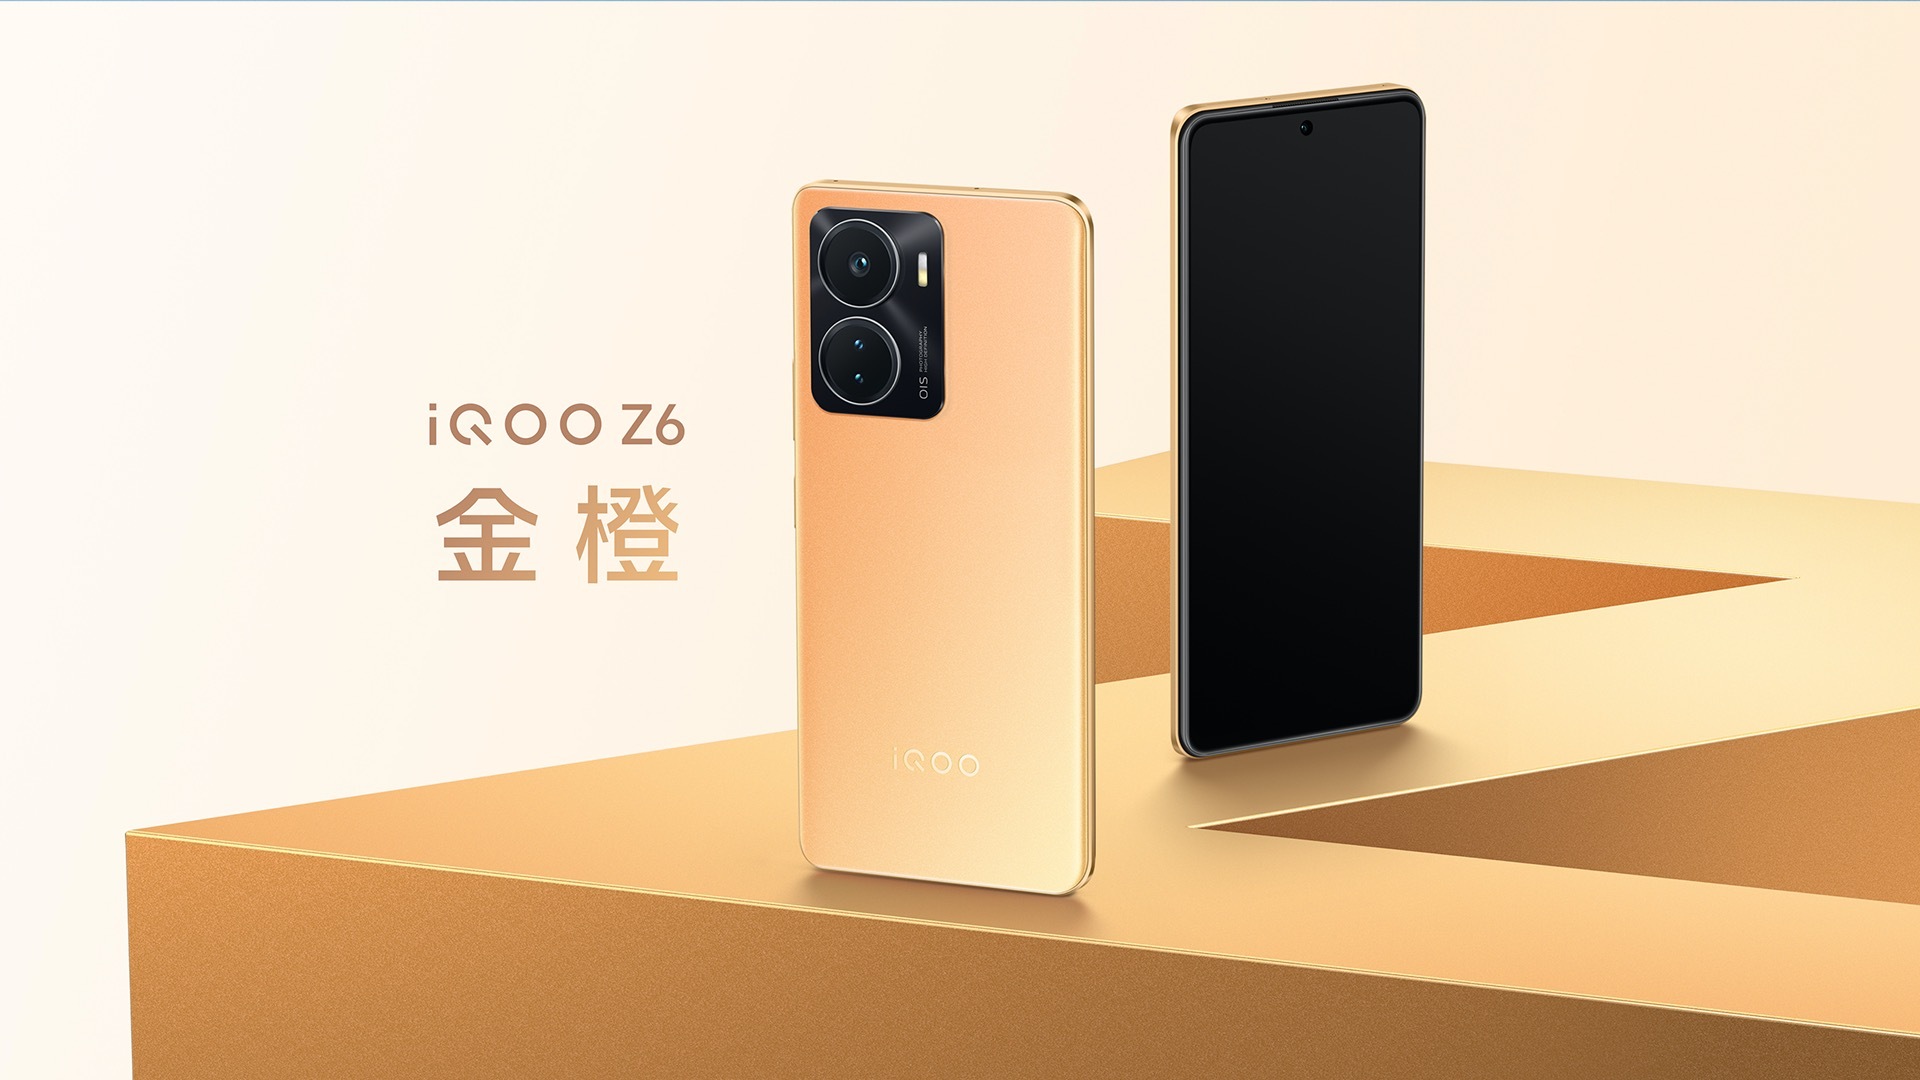 iQOO Z6 became the world's most powerful low-cost smartphone according to AnTuTu - in the top 3 are Honor and Xiaomi